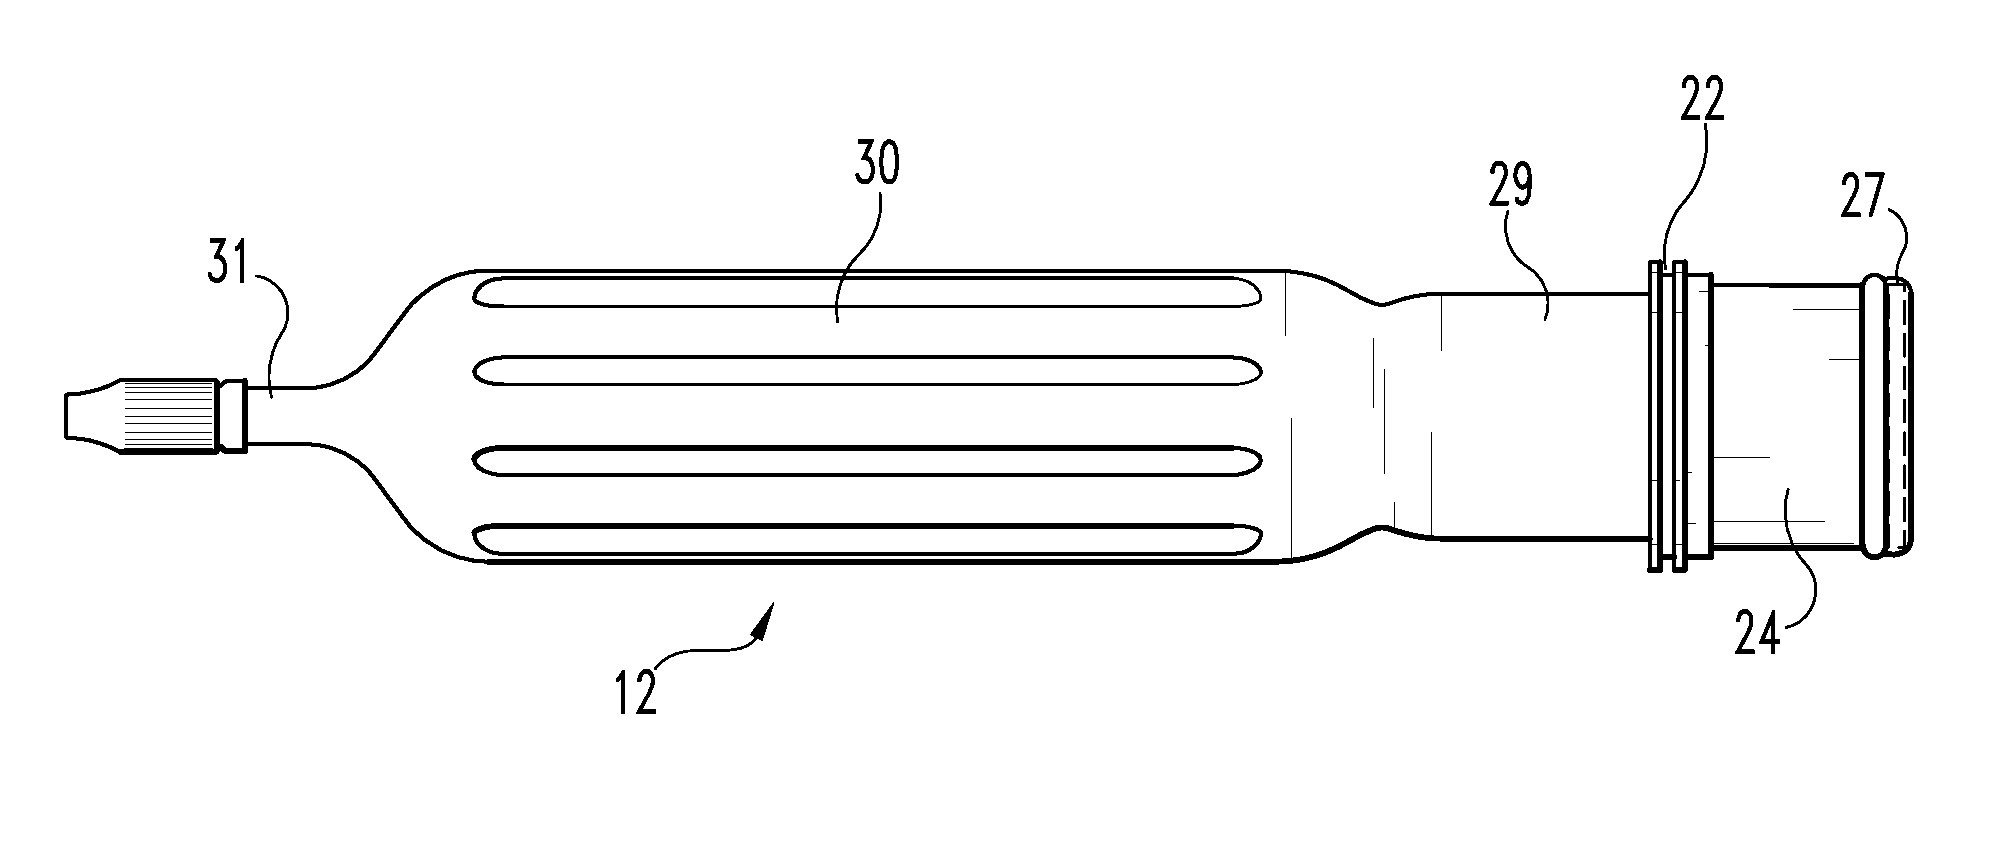 Device for supporting an ex-dwelling catheter